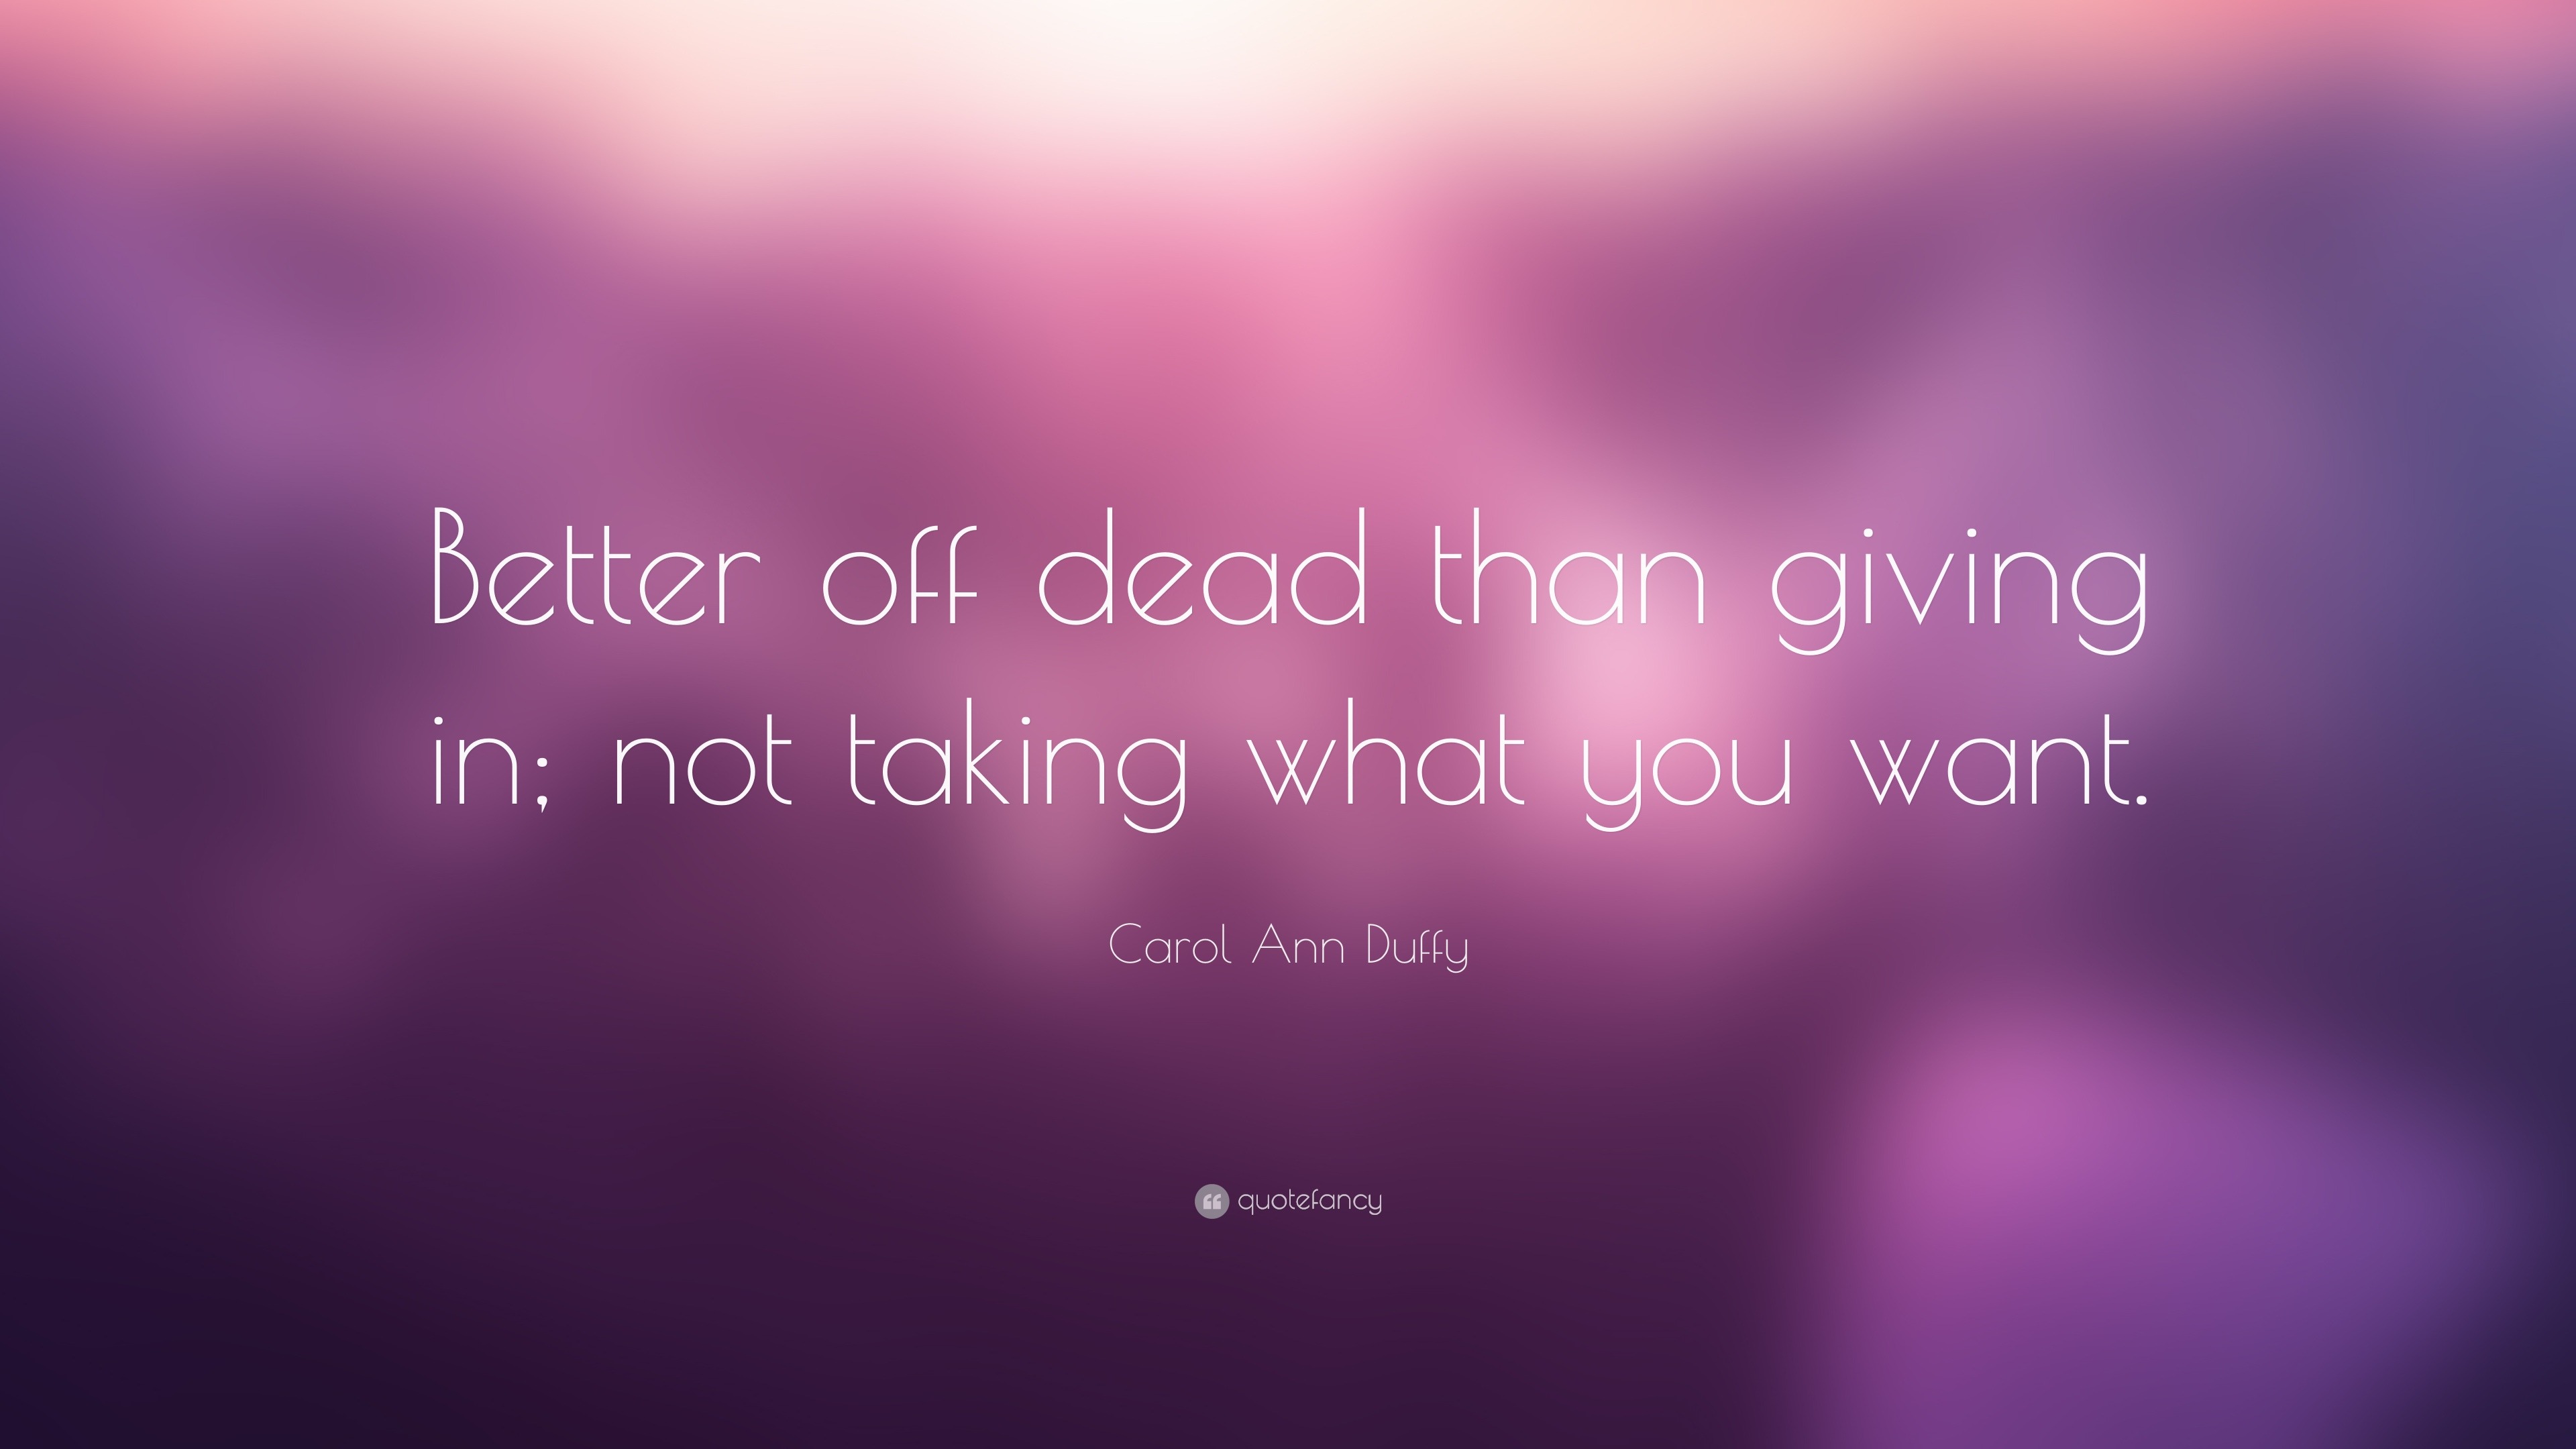 Skråstreg virkelighed død Carol Ann Duffy Quote: “Better off dead than giving in; not taking what you  want.”